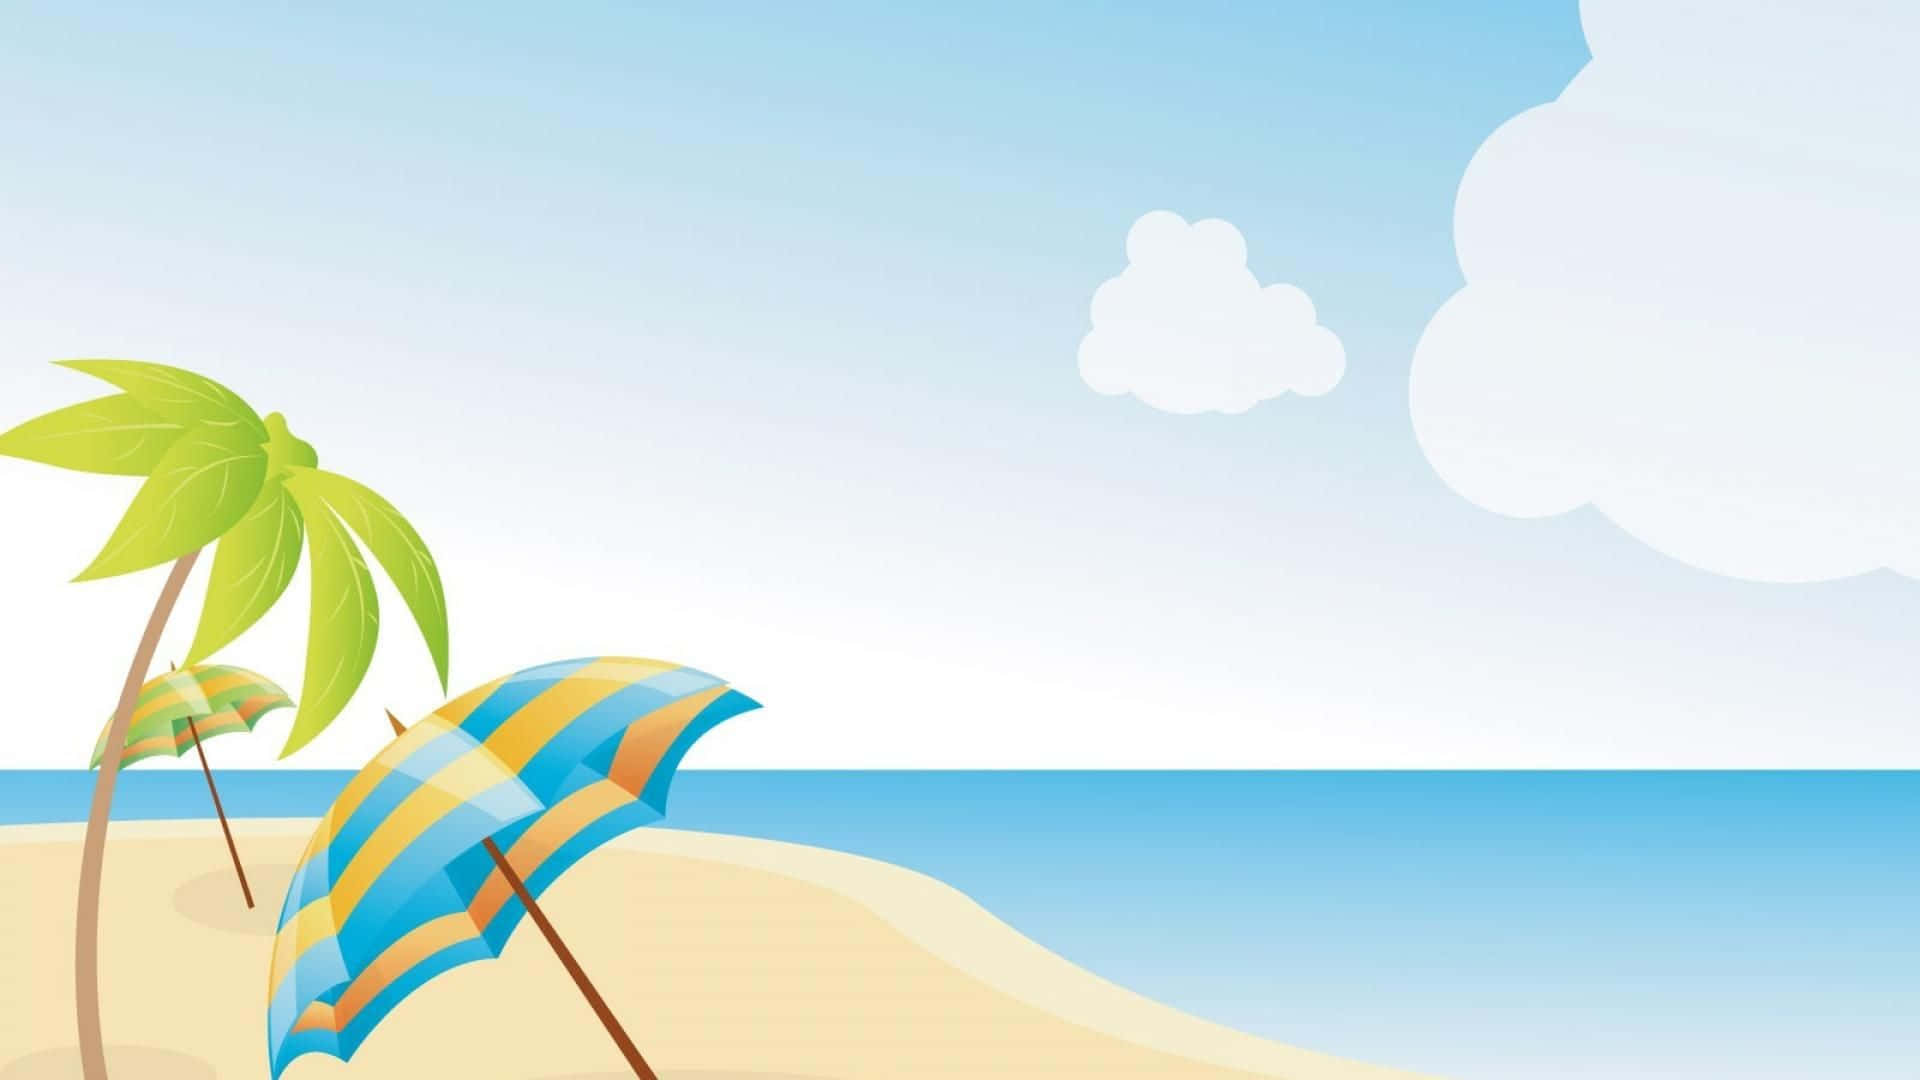 sunny day at the beach clipart